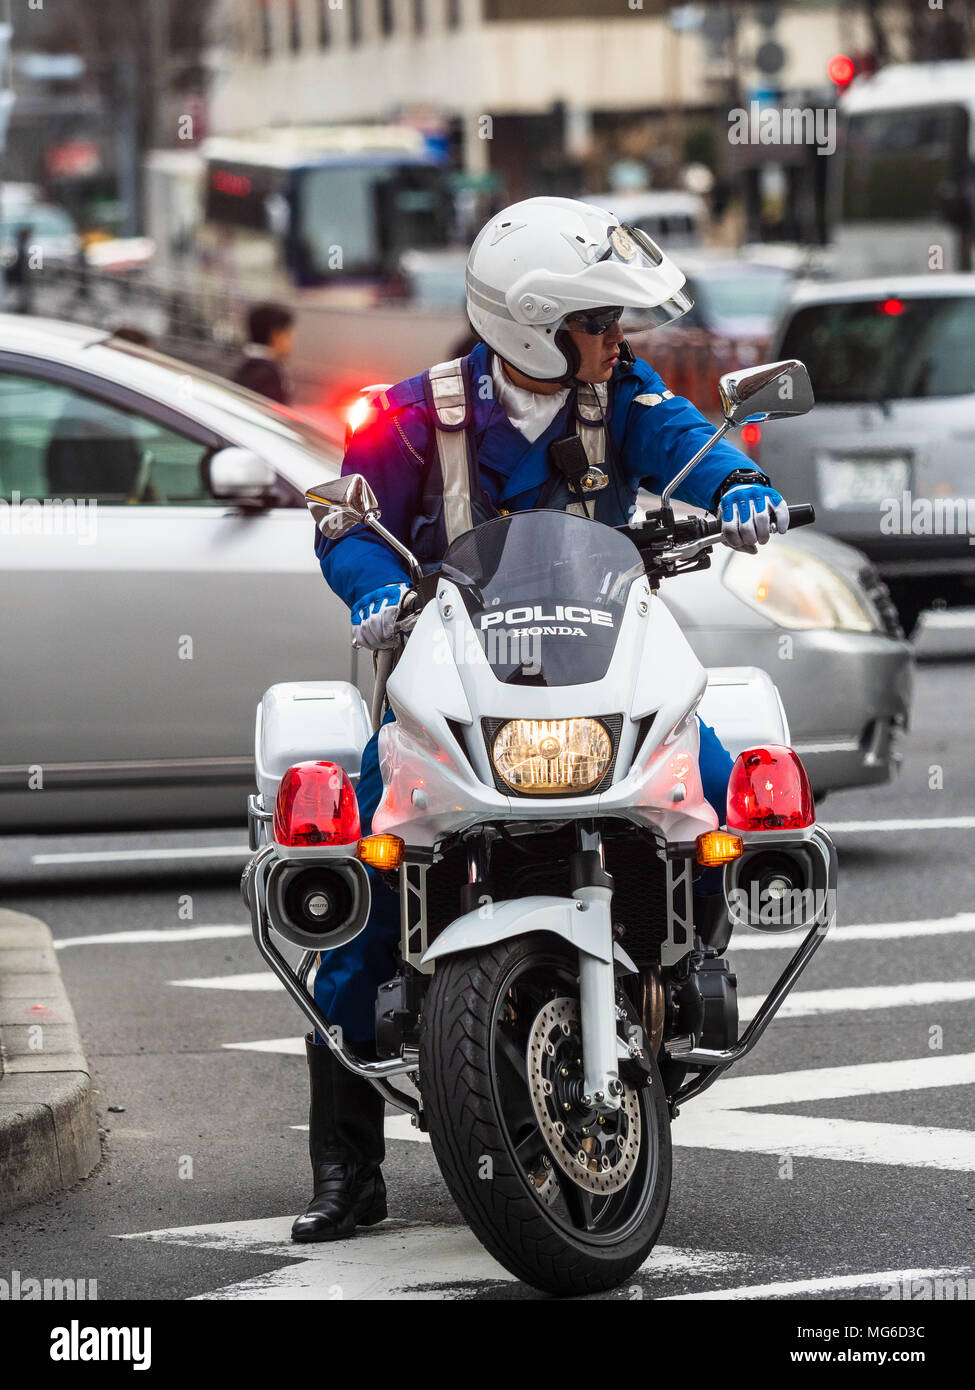 Tokyo Police Motorcyclist waits at a junction in Tokyo. Japanese Motorcycle Police Officer. Stock Photo